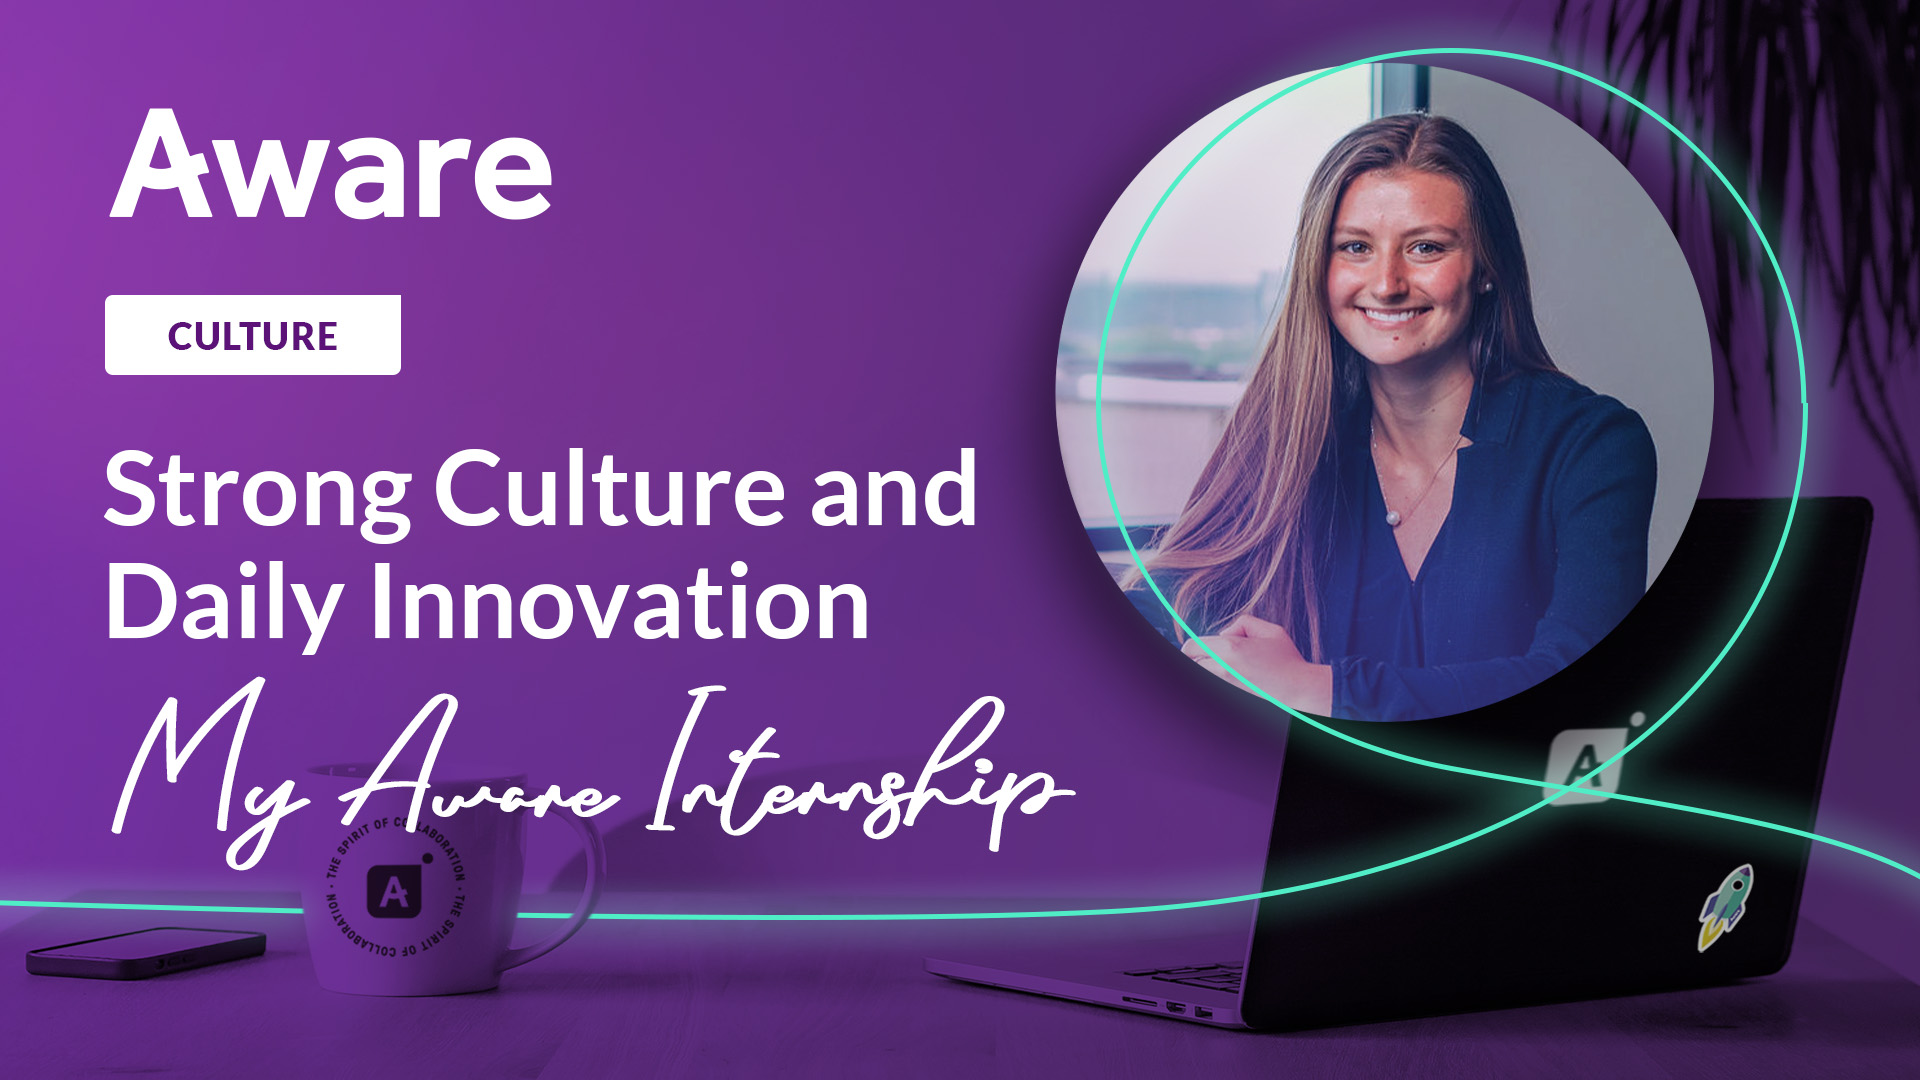 Strong Culture and Daily Innovation — My Aware Internship